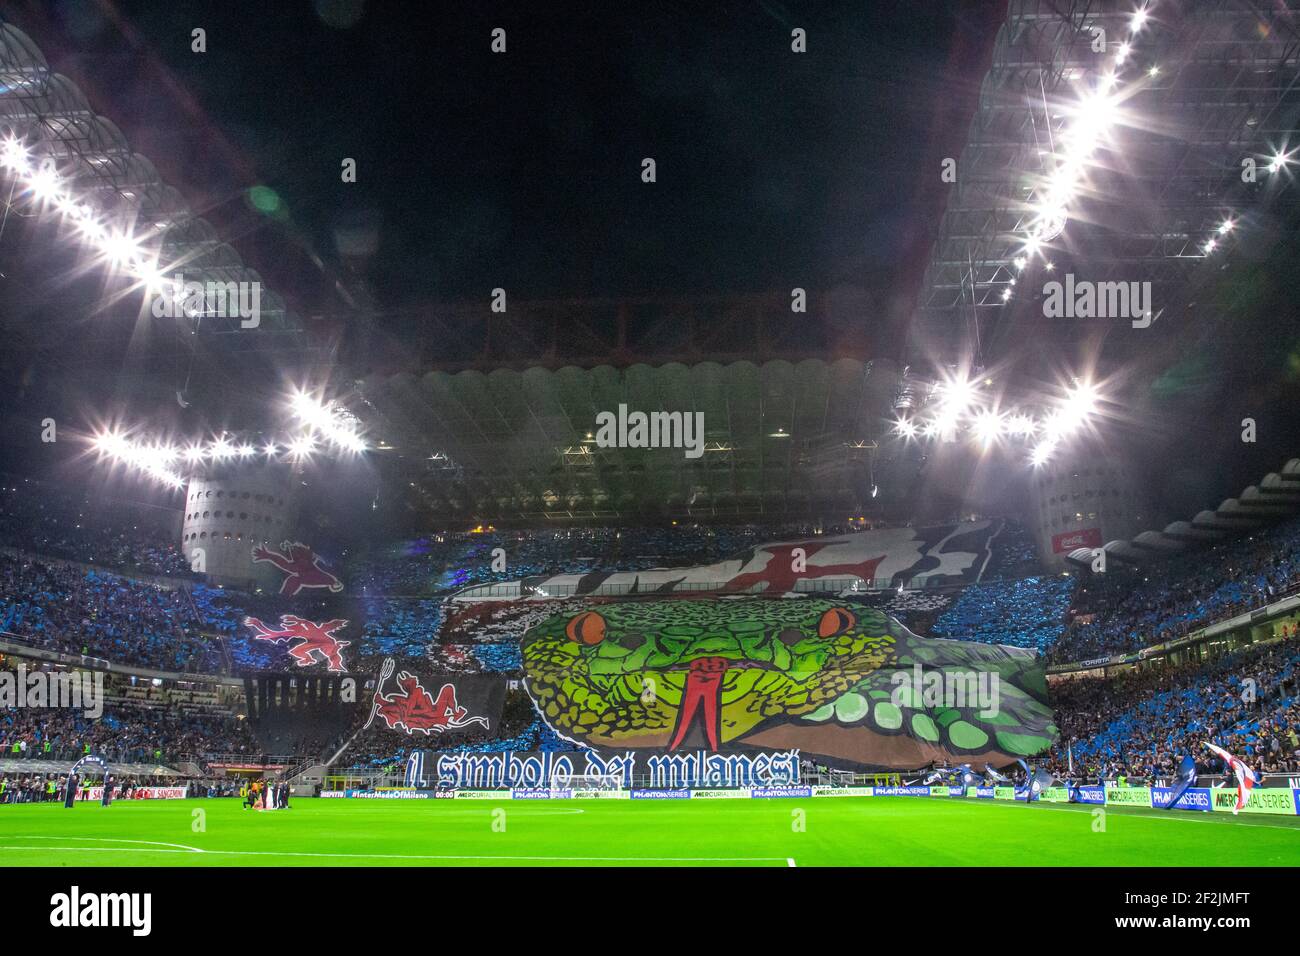 Inter Milan fans make a tifo before the Italian championship Serie A  football match between FC Internazionale and Juventus FC on October 6, 2019  at Giuseppe Meazza stadium in Milan, Italy -